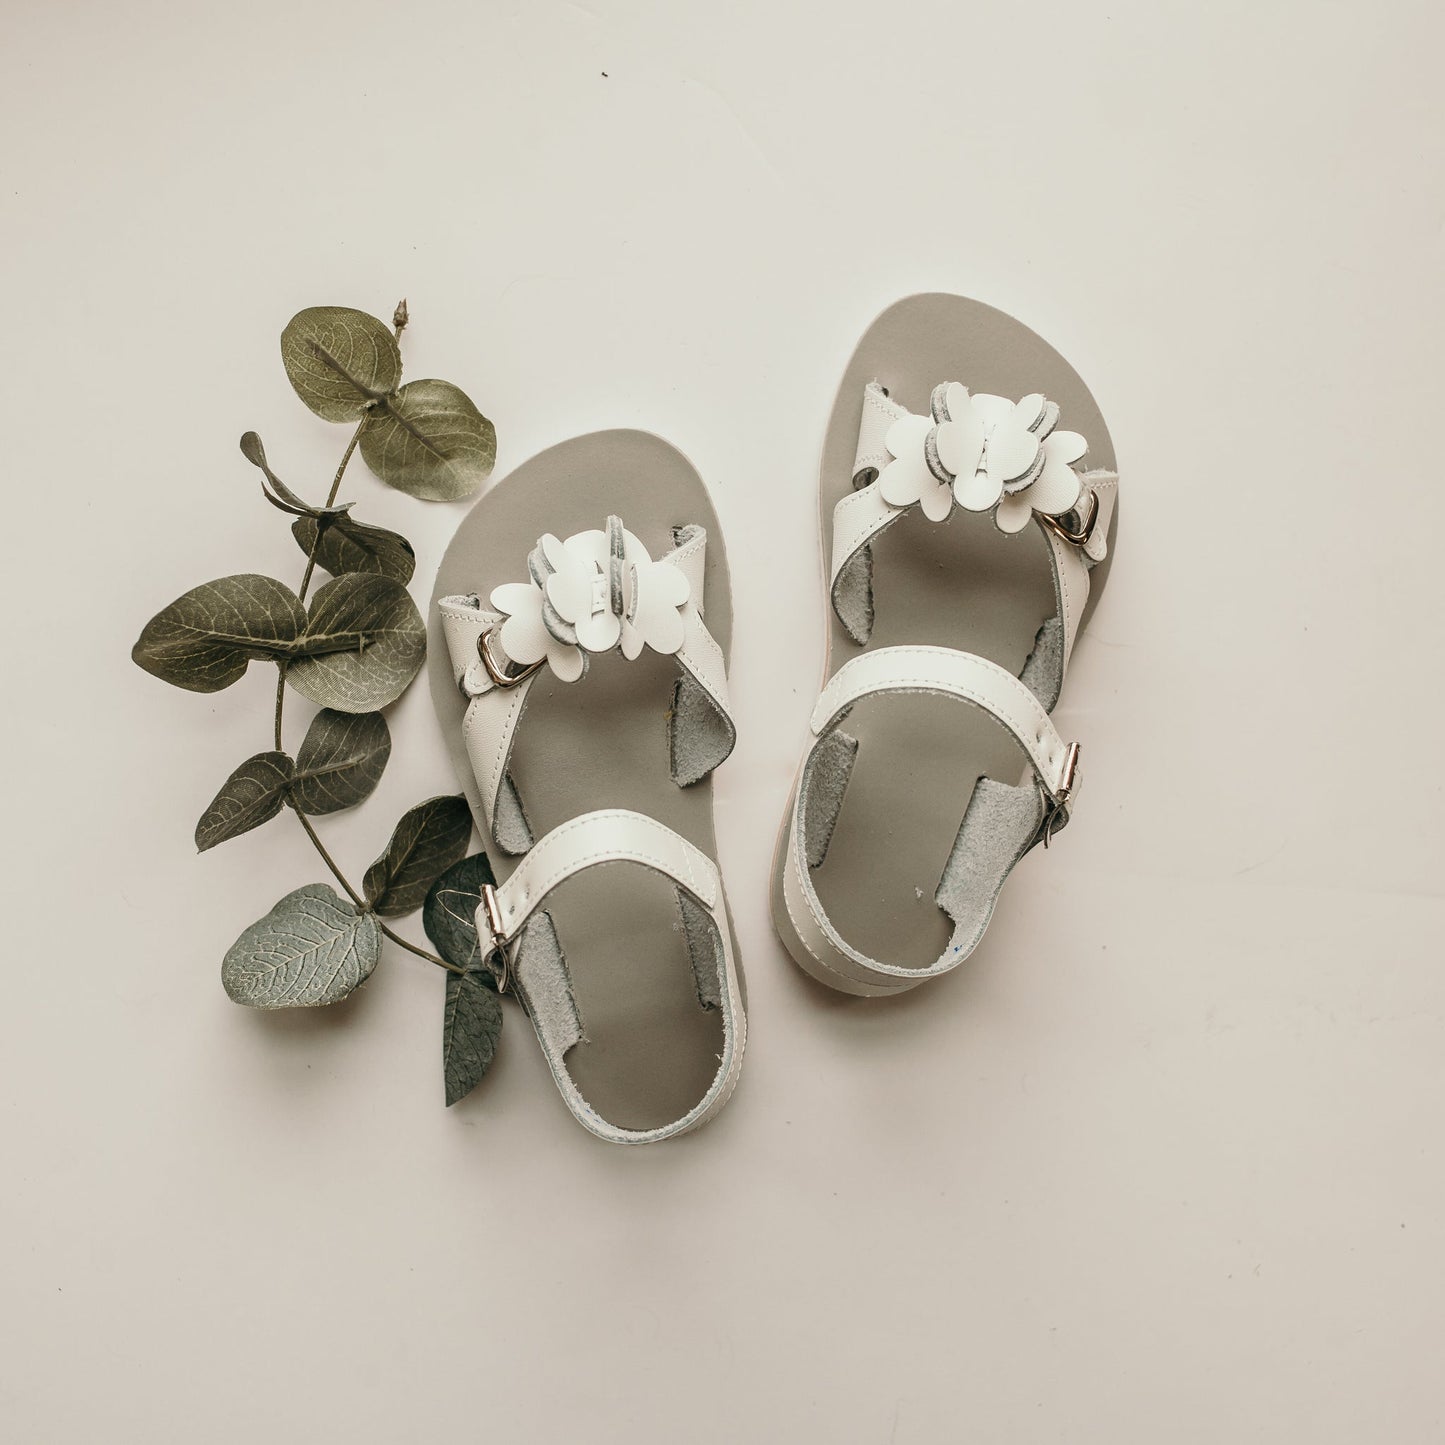 Each pair of shoes is carefully crafted in Central Pennsylvania.  The White Amelia Sandal is made of white leather and lined with breathable leather and cotton which work together to draw out any moisture. The structure of the shoe and the flexible sole provide stability without weight to support your child's early steps.